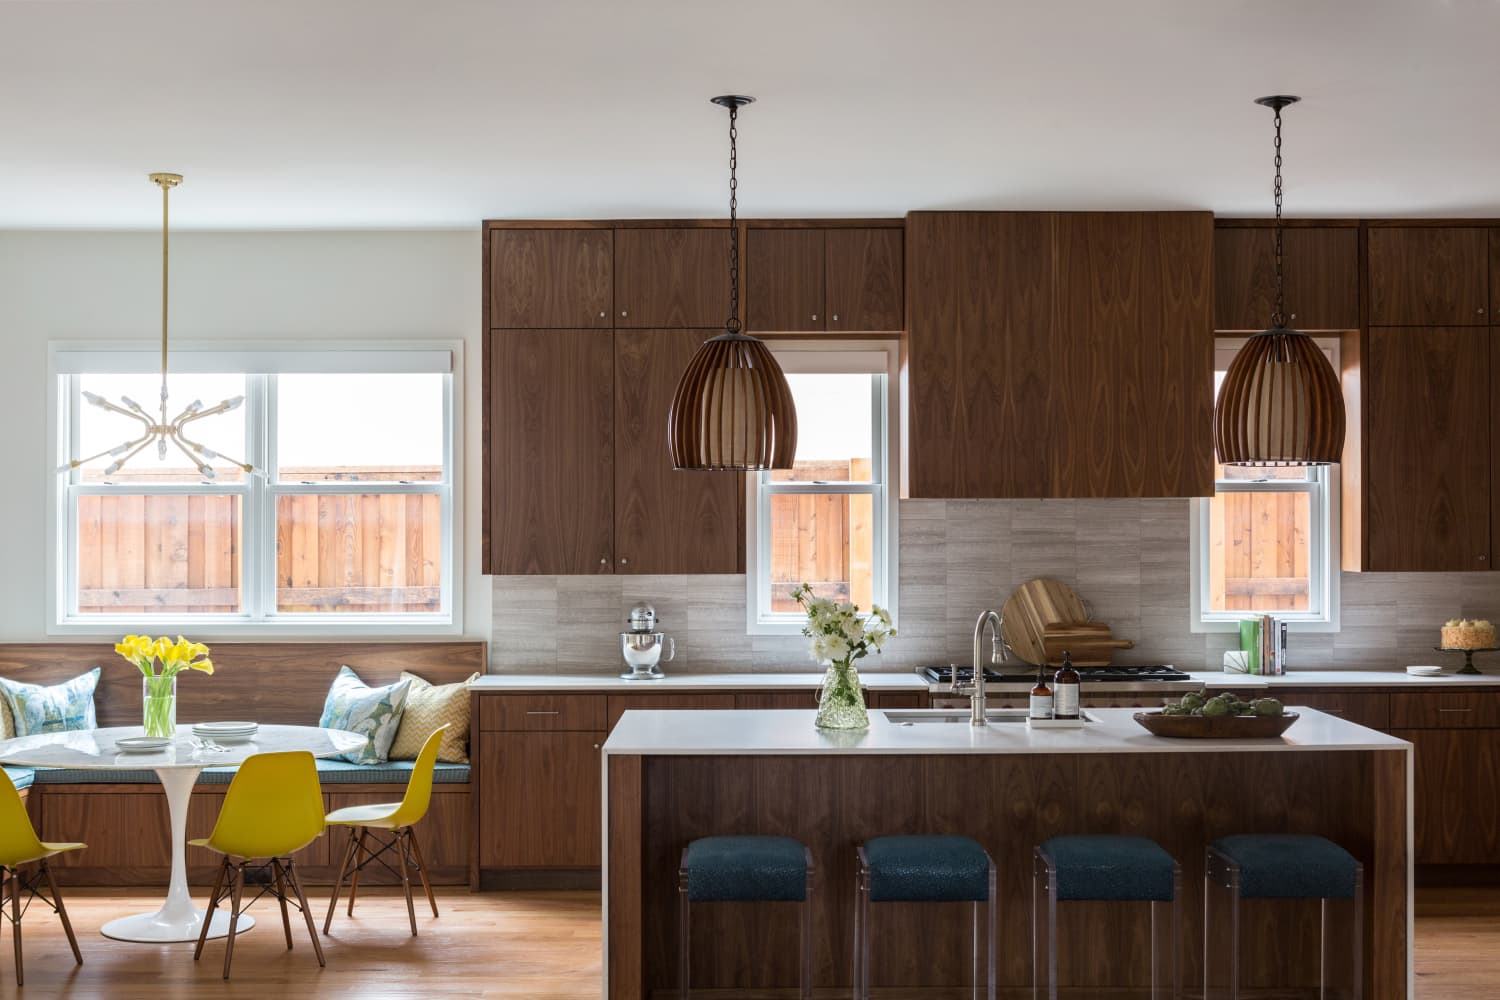 The Best and Most Popular Kitchen Trends for in 2021, According to ...